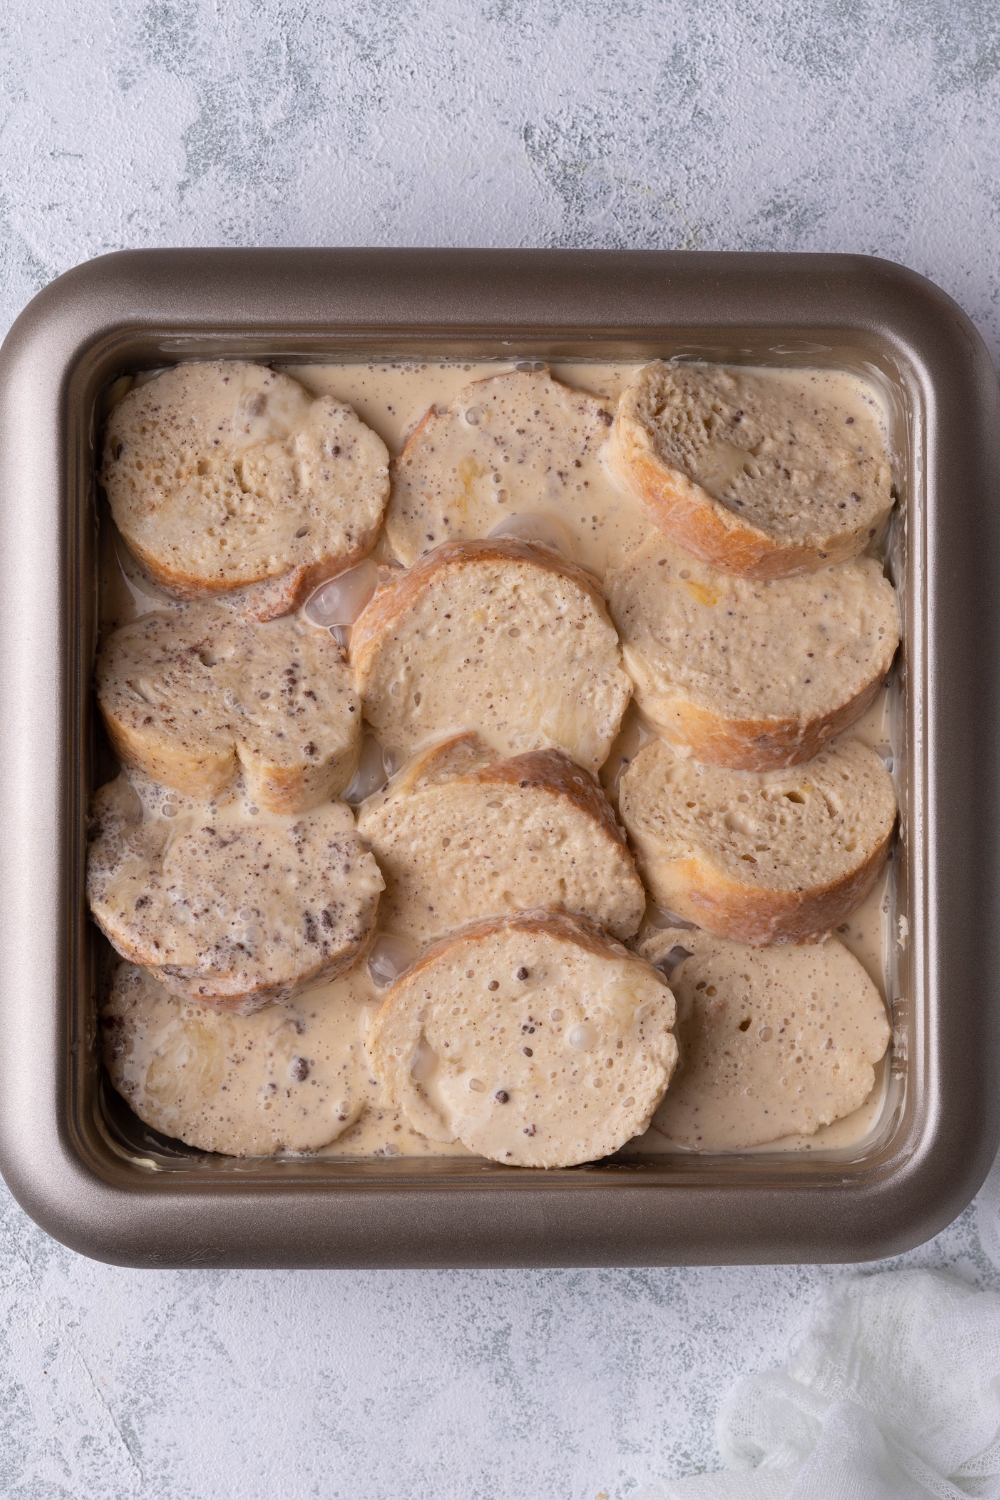 A pan with uncooked french toast casserole.